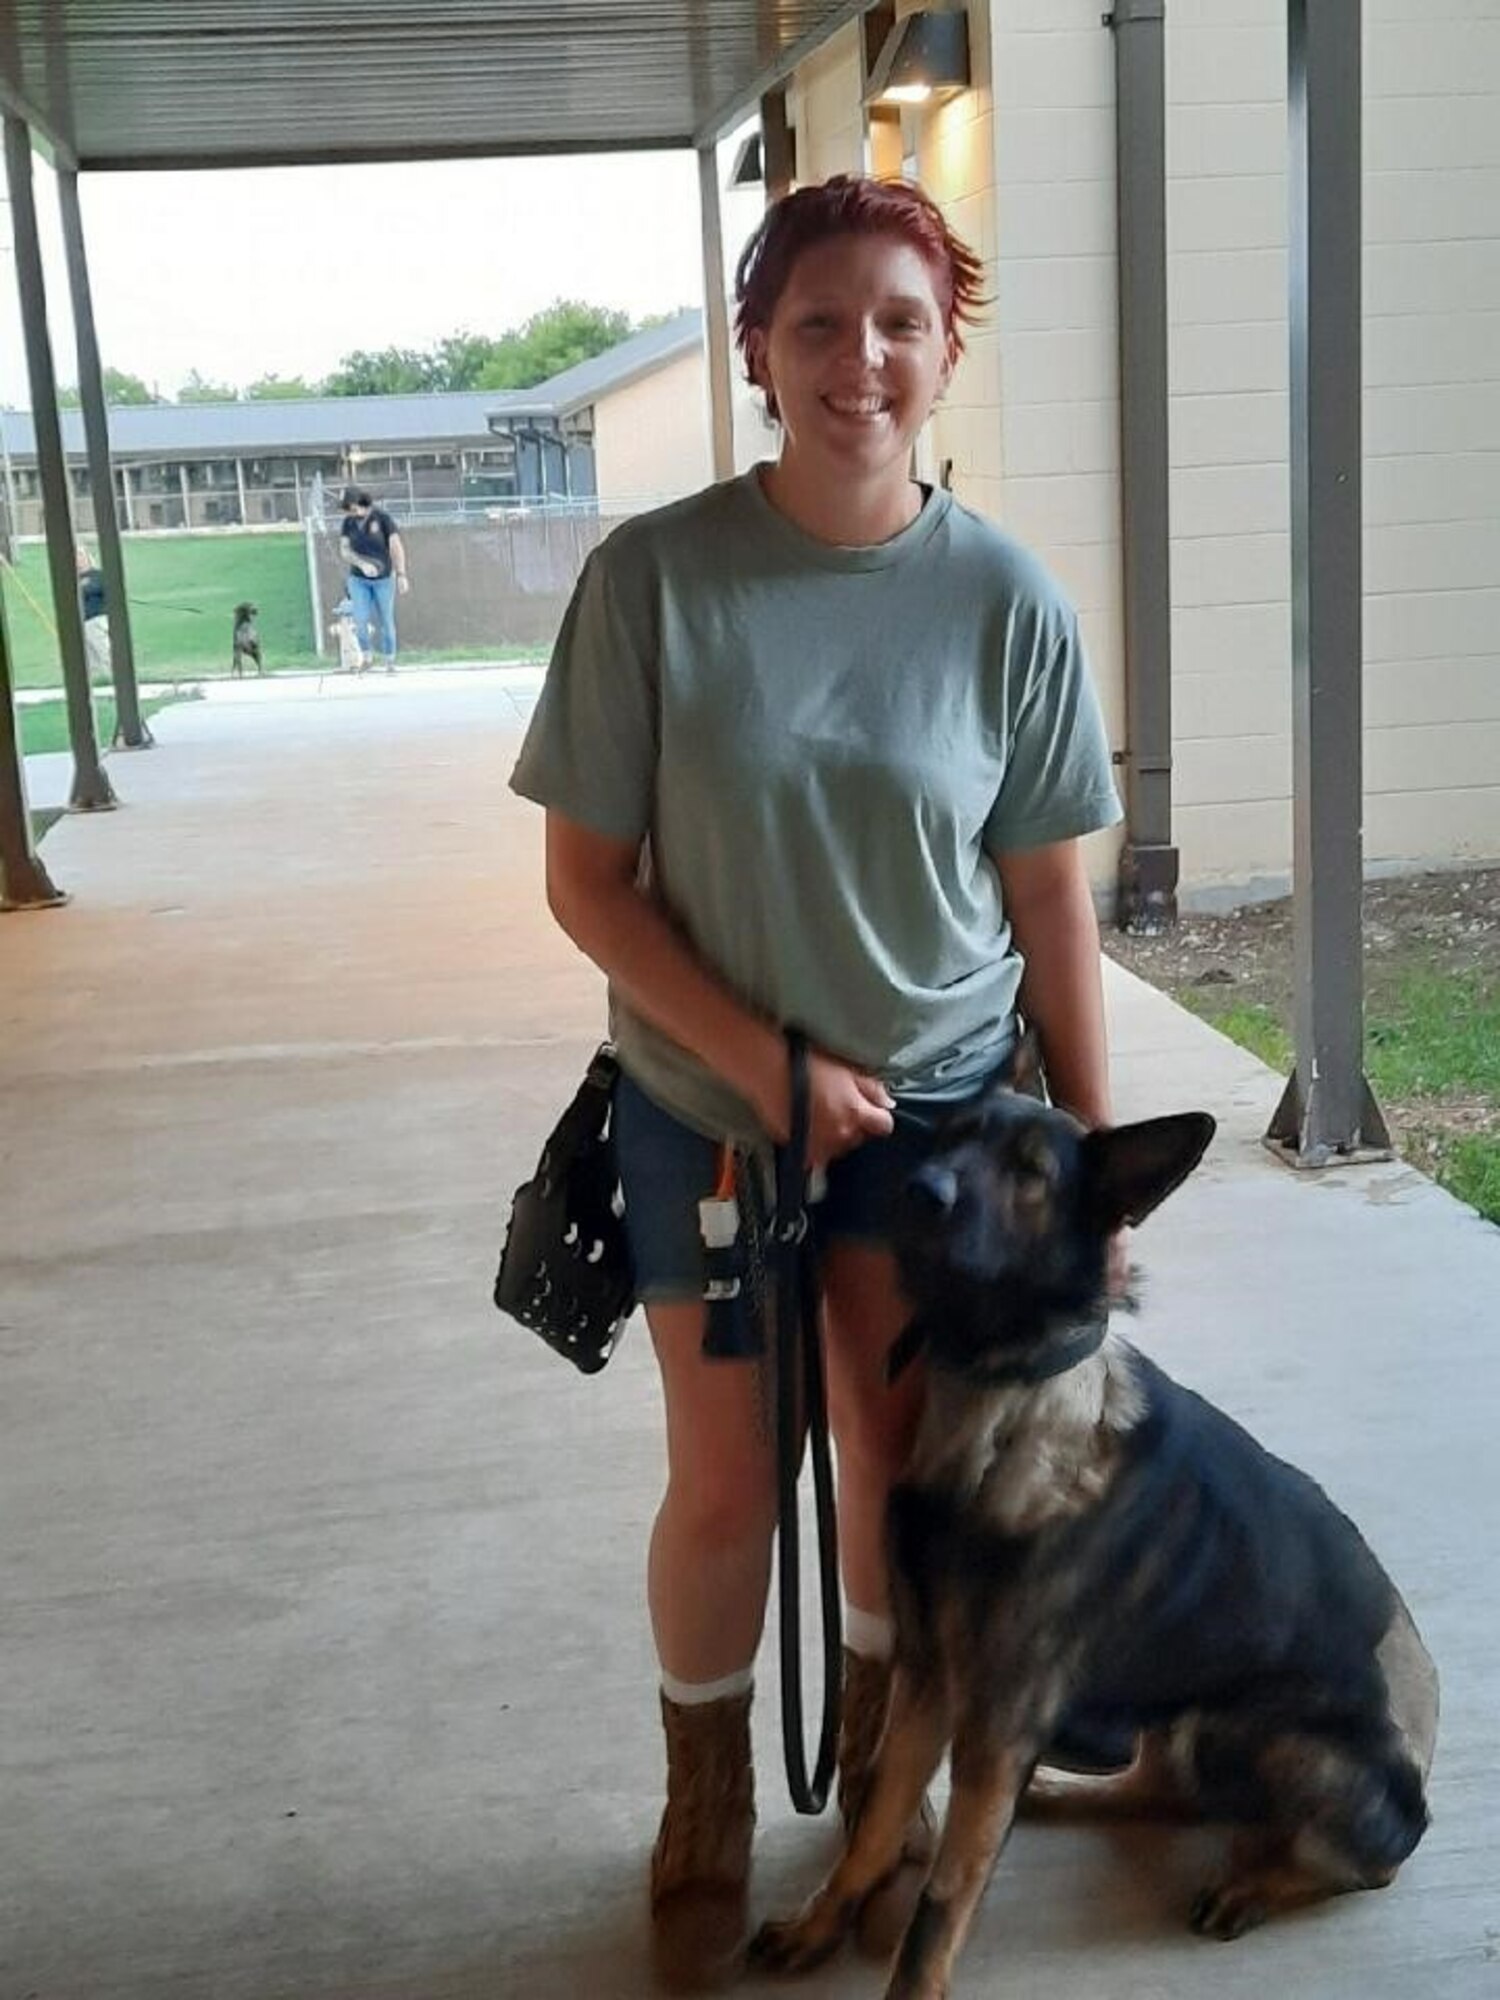 Photo of Airman with German Shepard military working dog by her side.